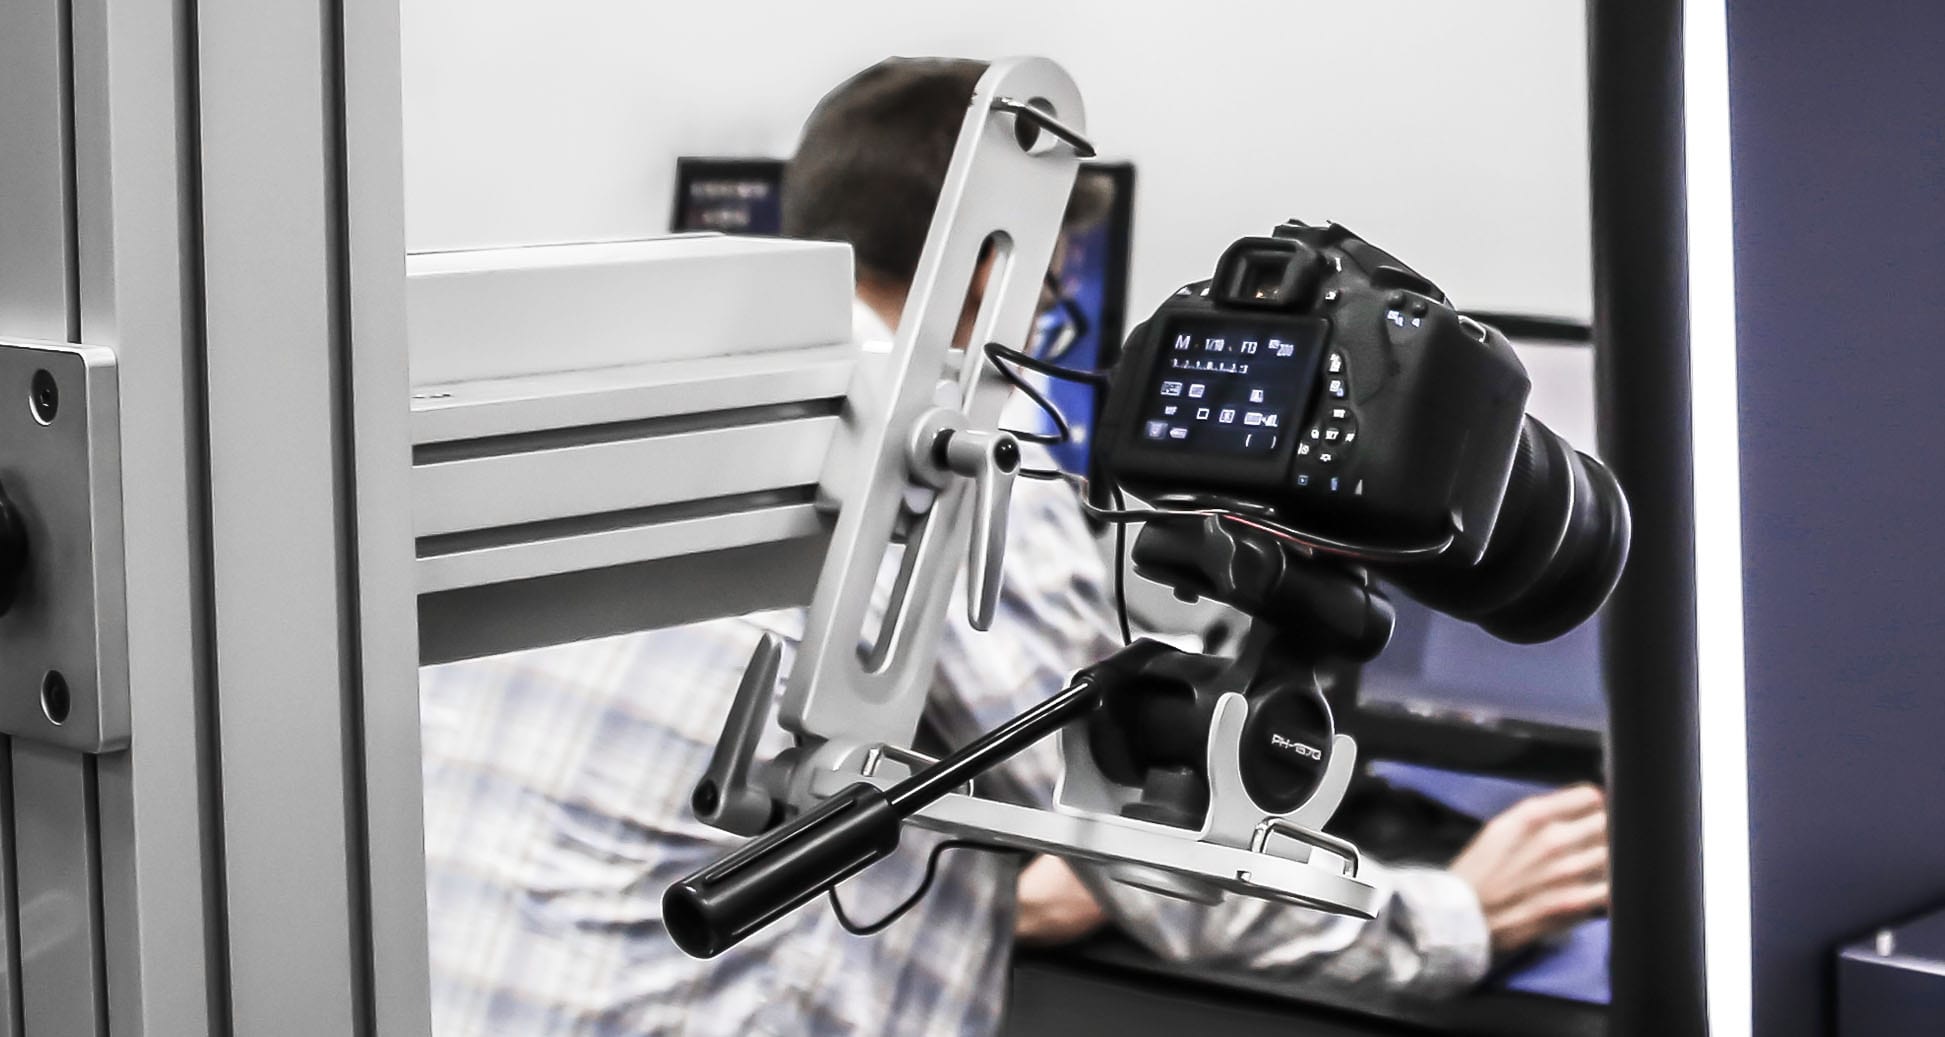 3D photography equipment from Ortery Technologies offers superior flexibility